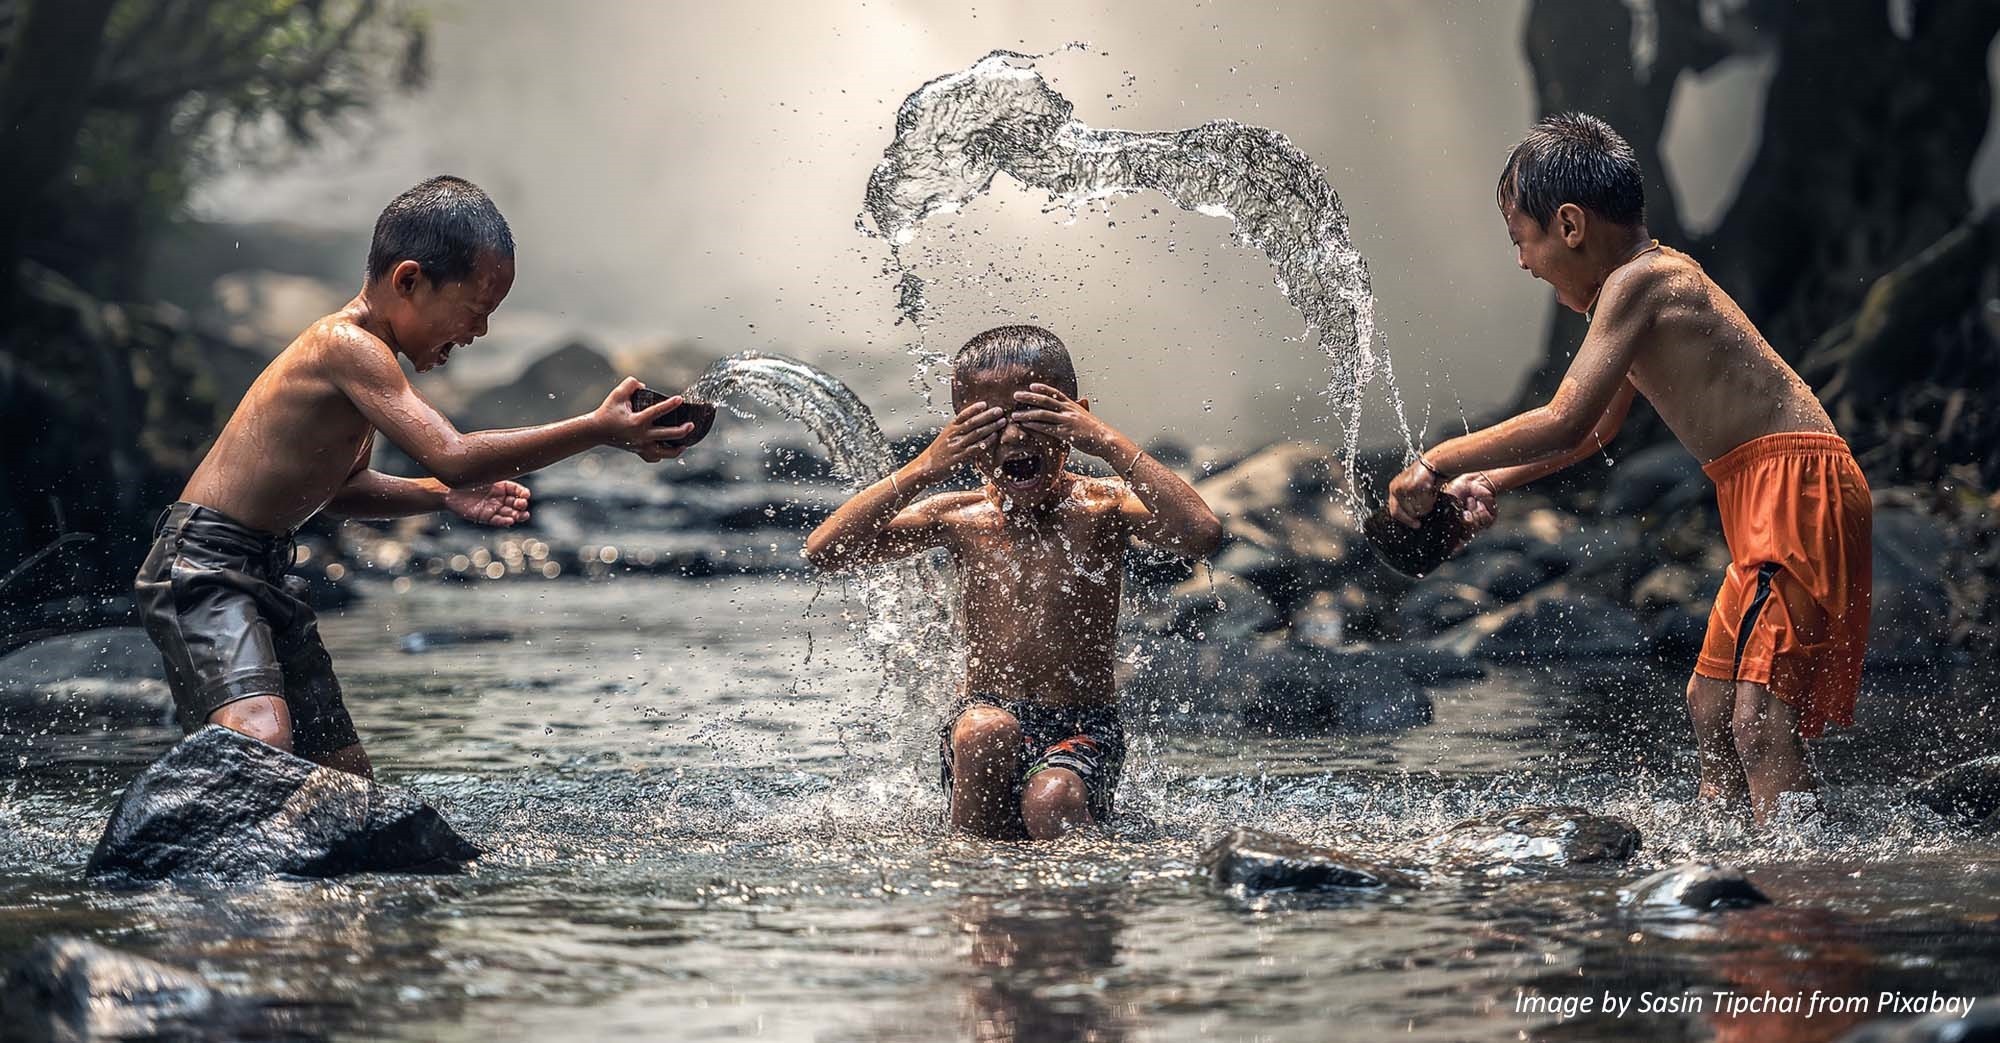 Three young boys joyfully throw water over each other whilst playing in a river